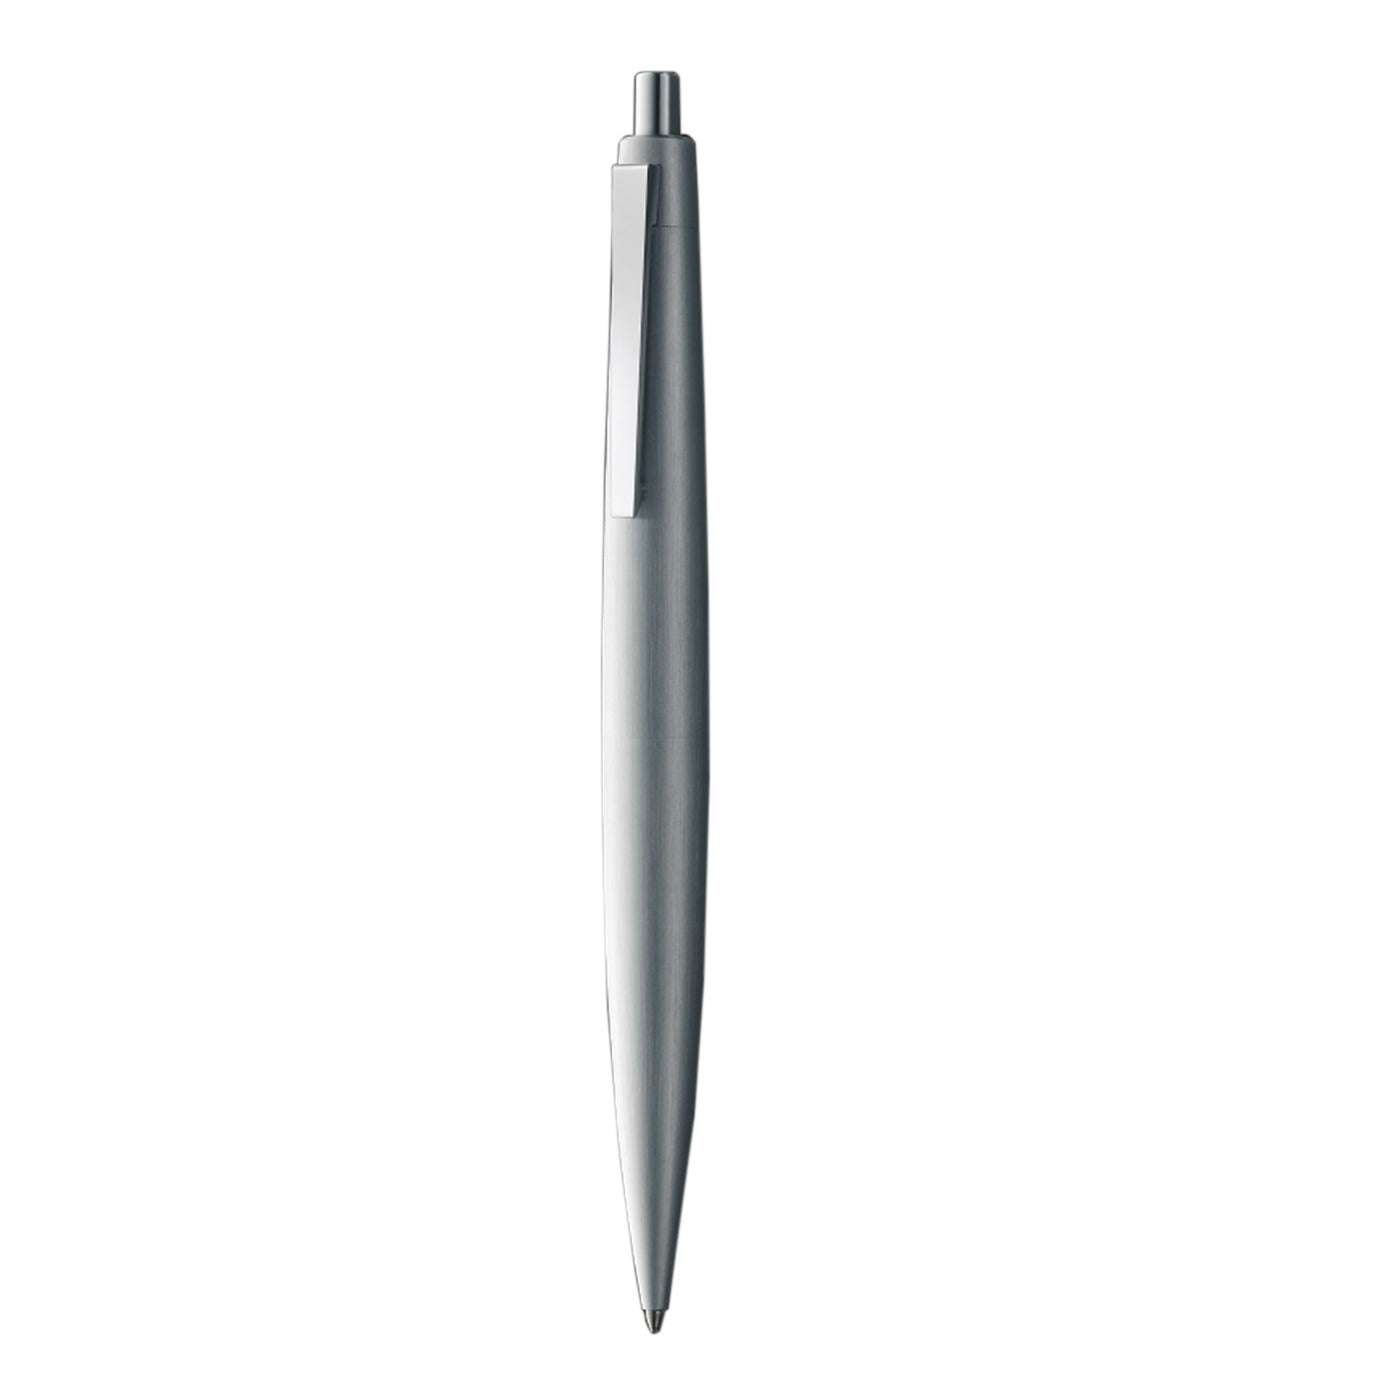 Lamy 2000 Ball Pen - Brushed Stainless Steel 2